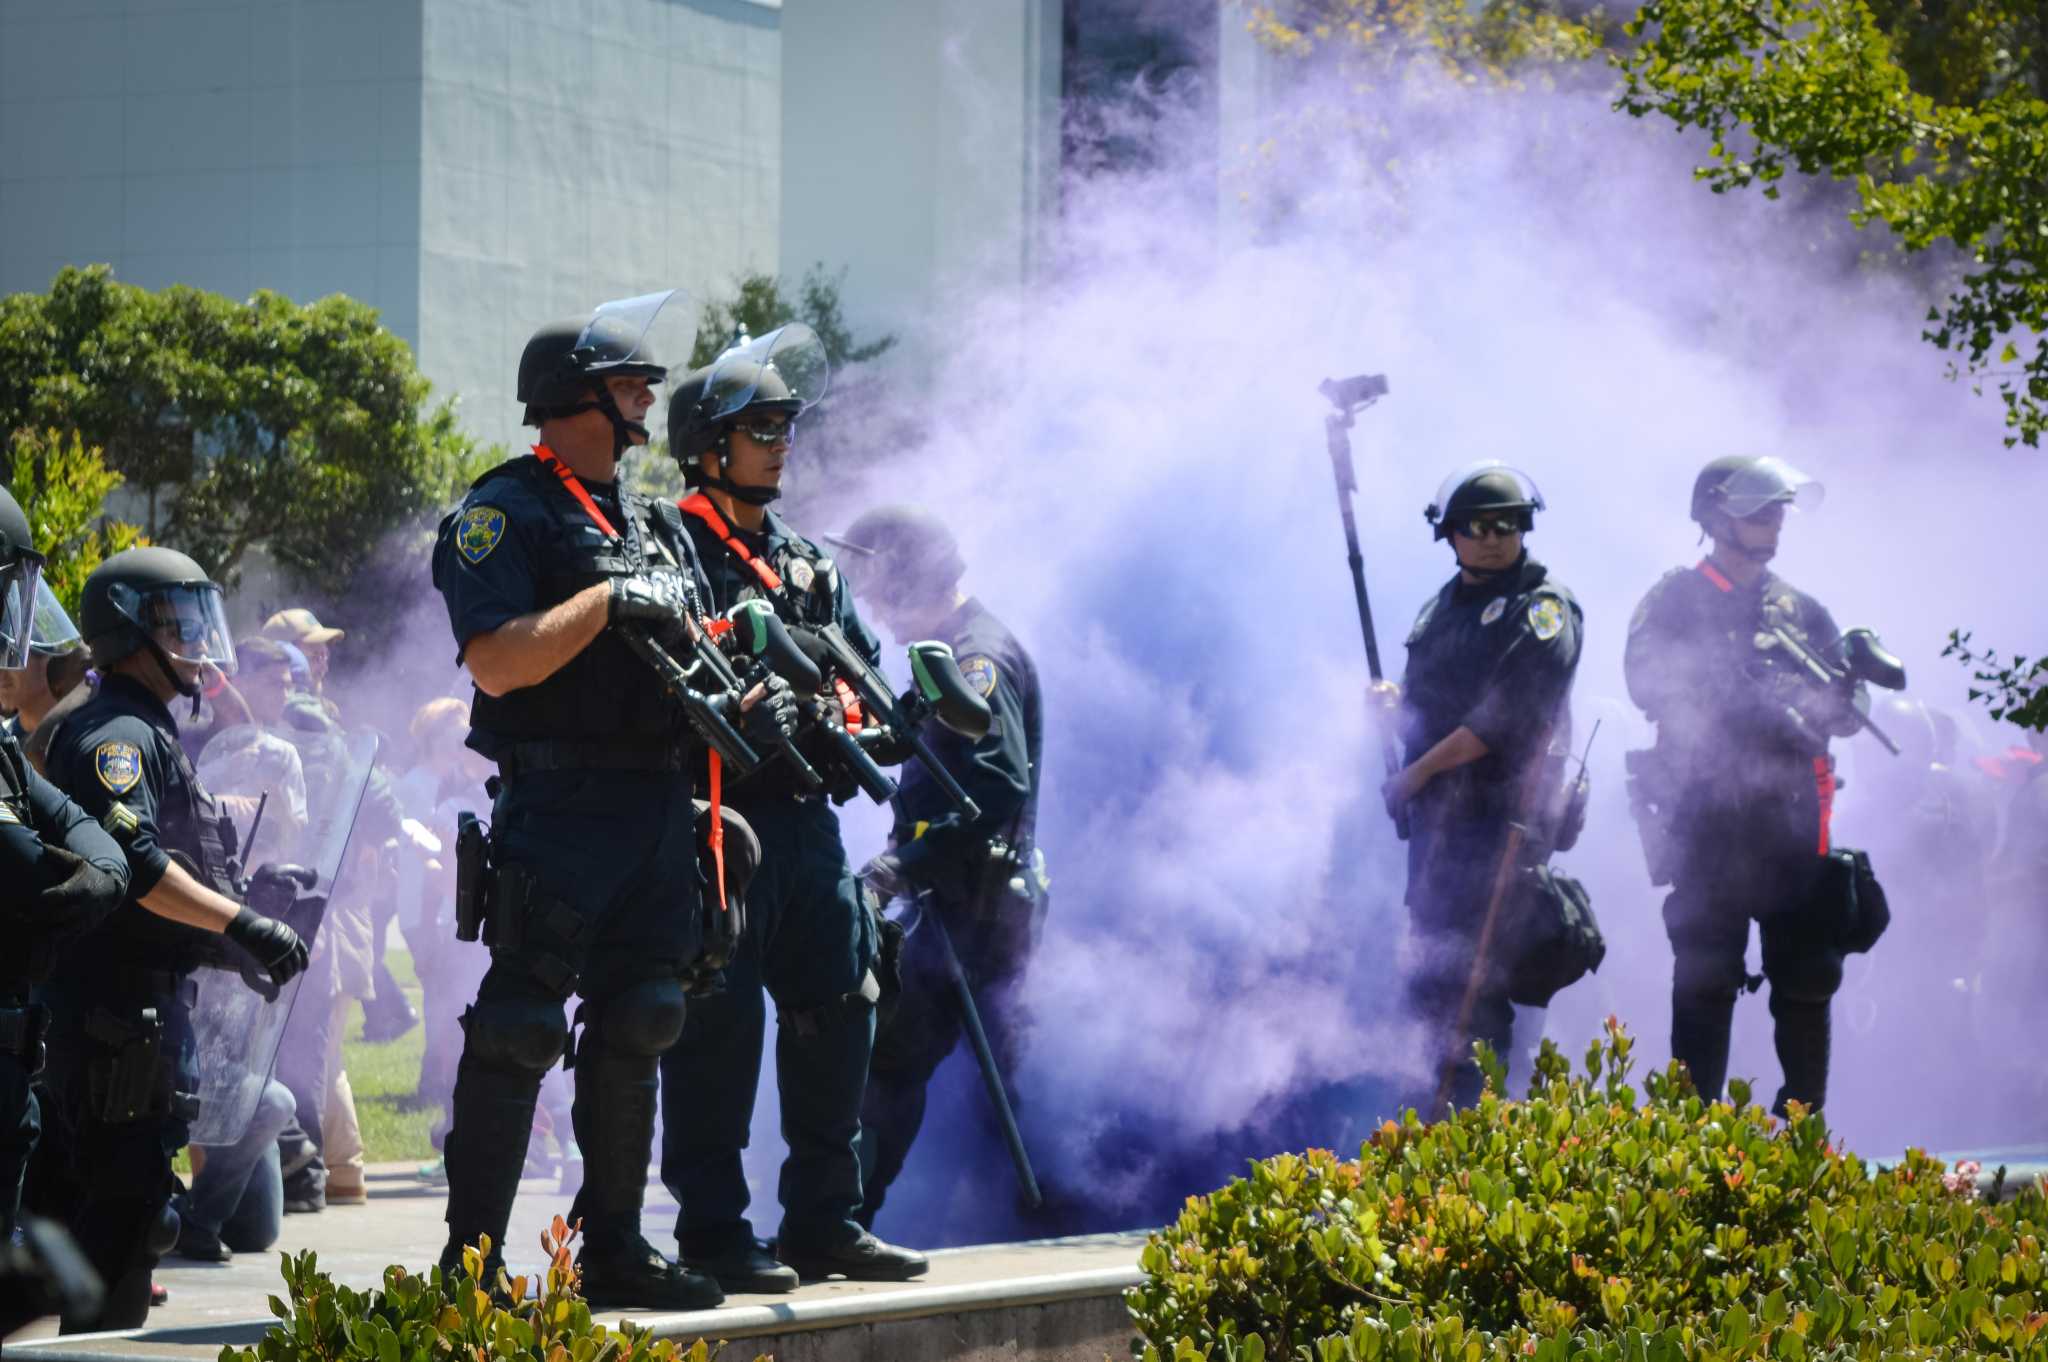 Protesters throw a smoke bomb at officers during the No Marxism in America rally at Martin Luther King Jr. Civic Center Park in Berkeley, on Sunday Aug. 27, 2017. (Ian Williams/Golden Gate Xpress)